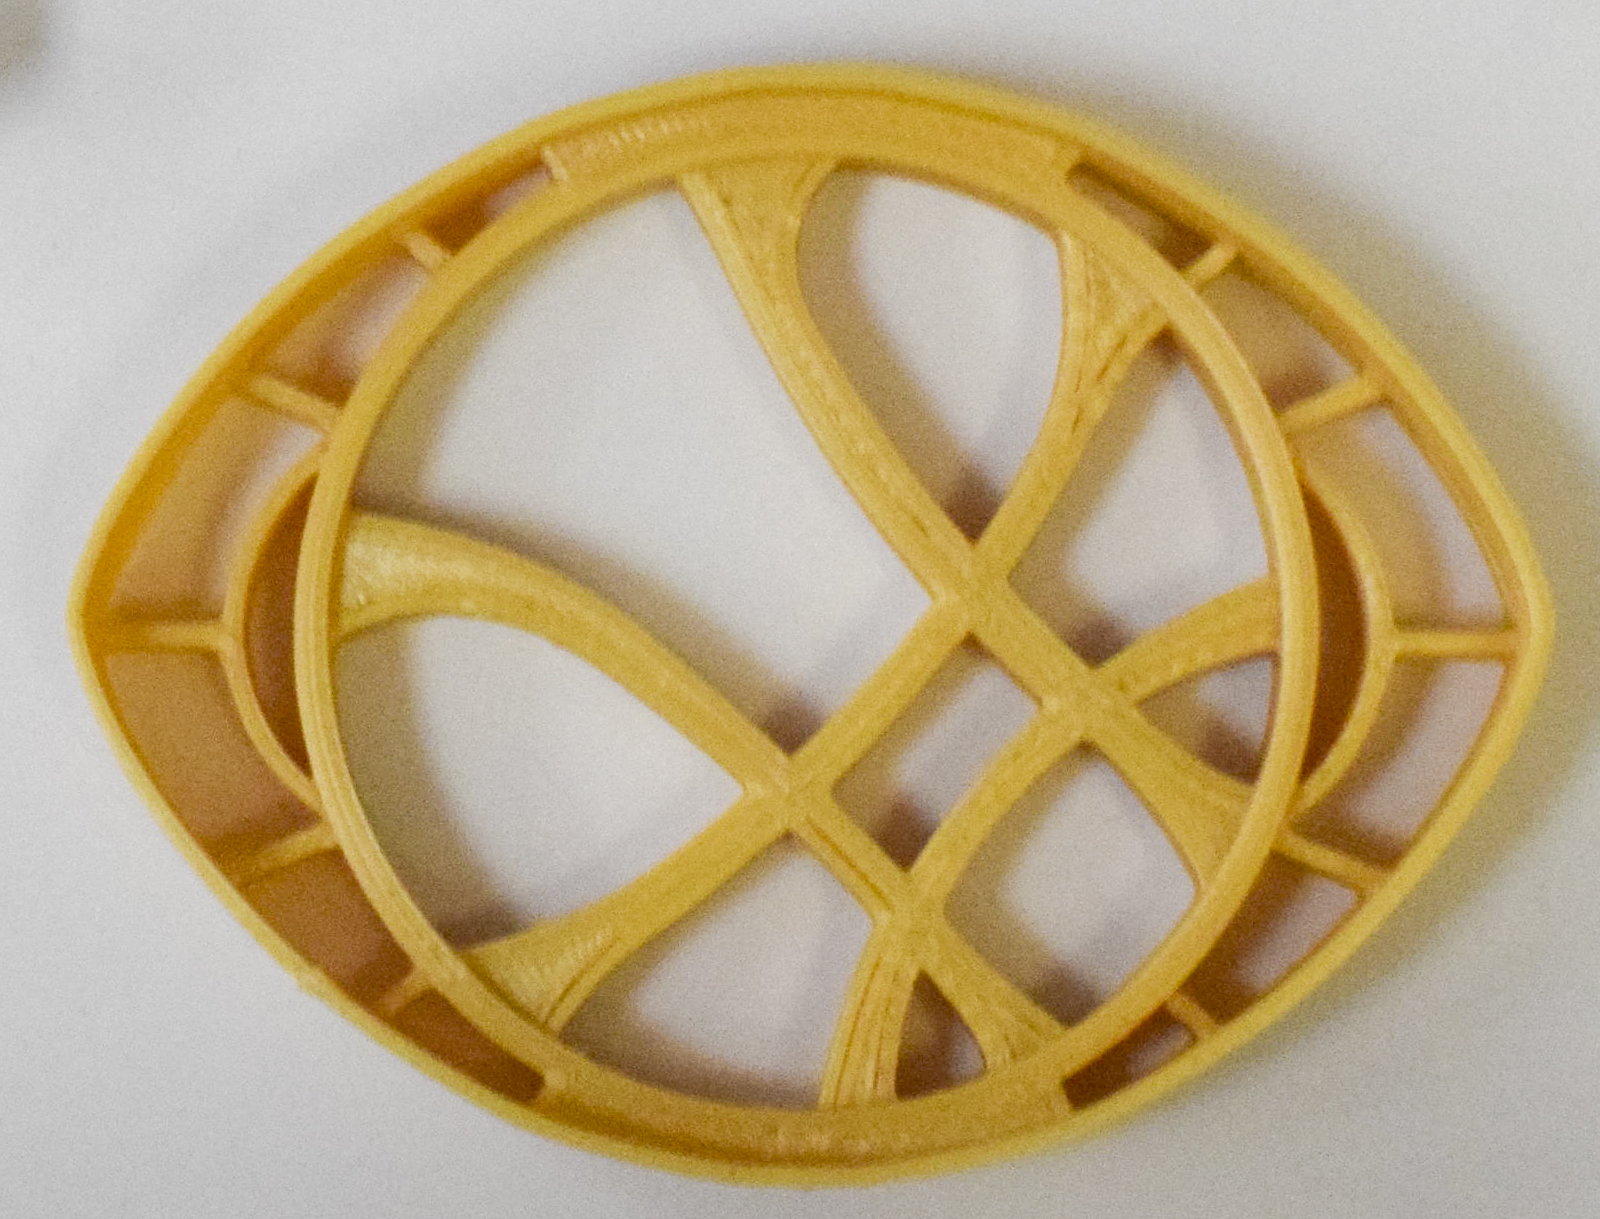 Primary image for Dr Strange Eye Agamotto Marvel Movie Comics Cookie Cutter 3D Printed USA PR768